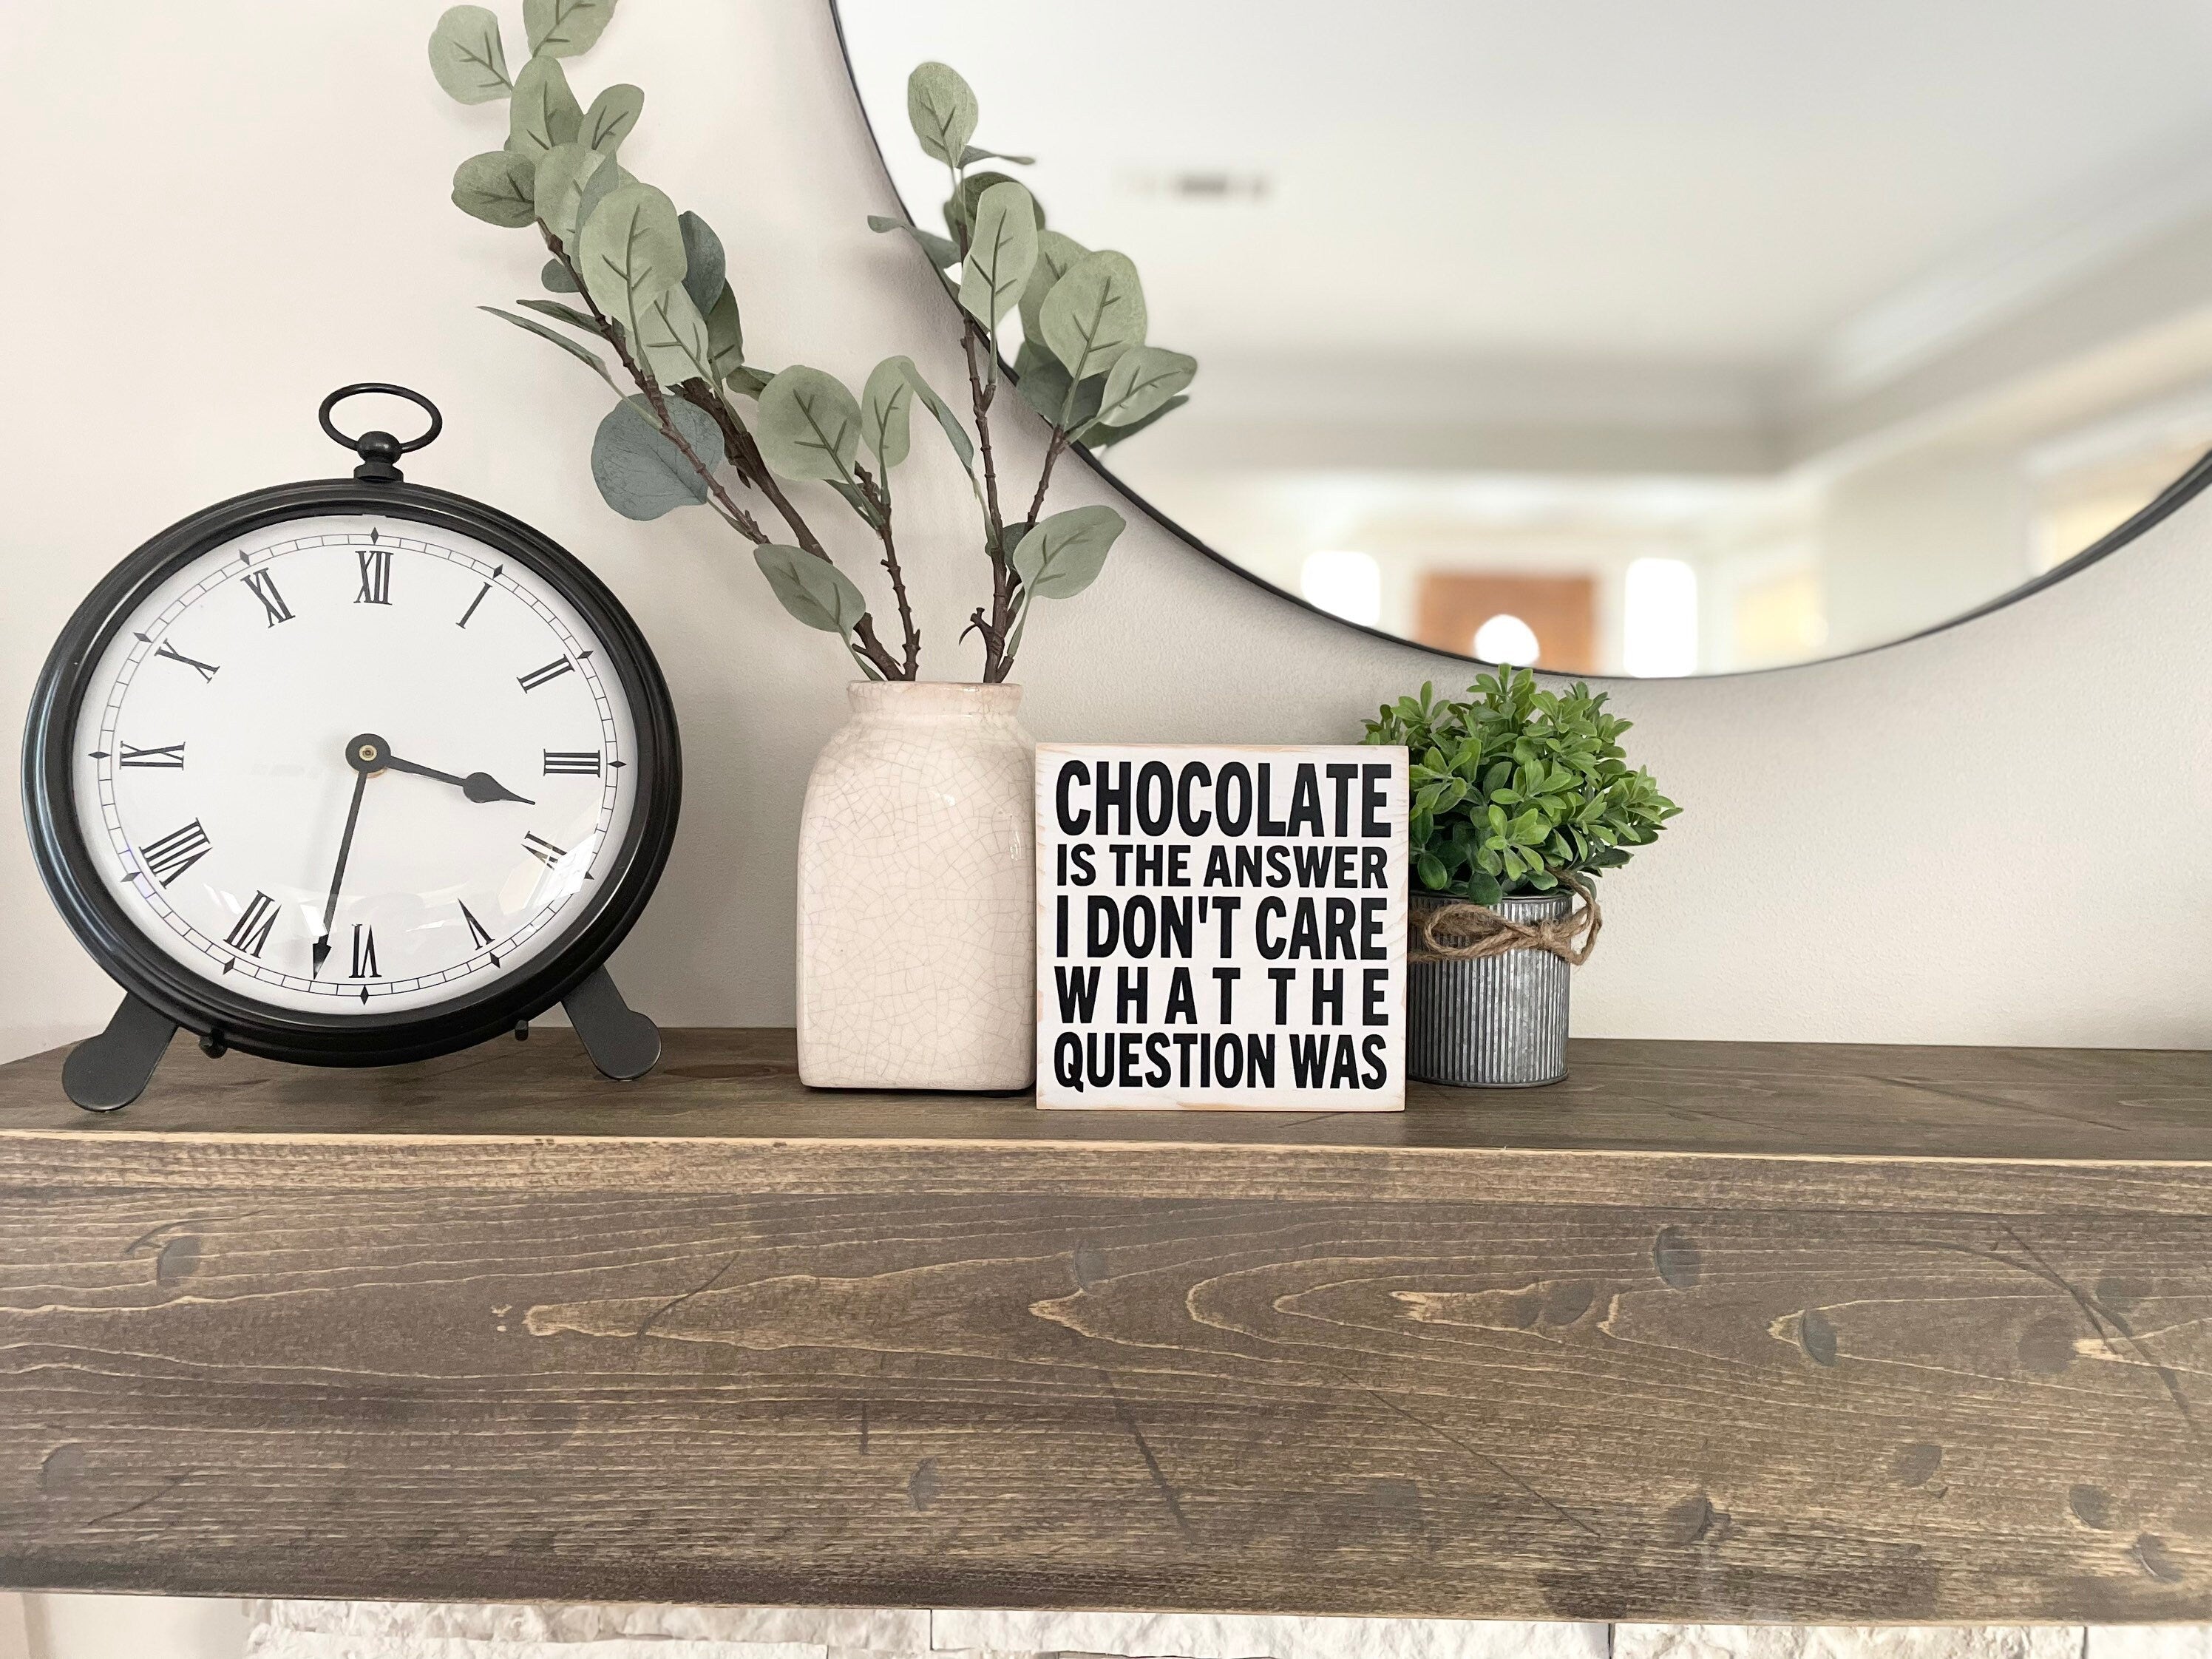 small, square, wood sign painted white with all caps text painted in black that reads: Chocolate is the answer I don't care what the question was. It is sitting on a wood mantle next to plants.